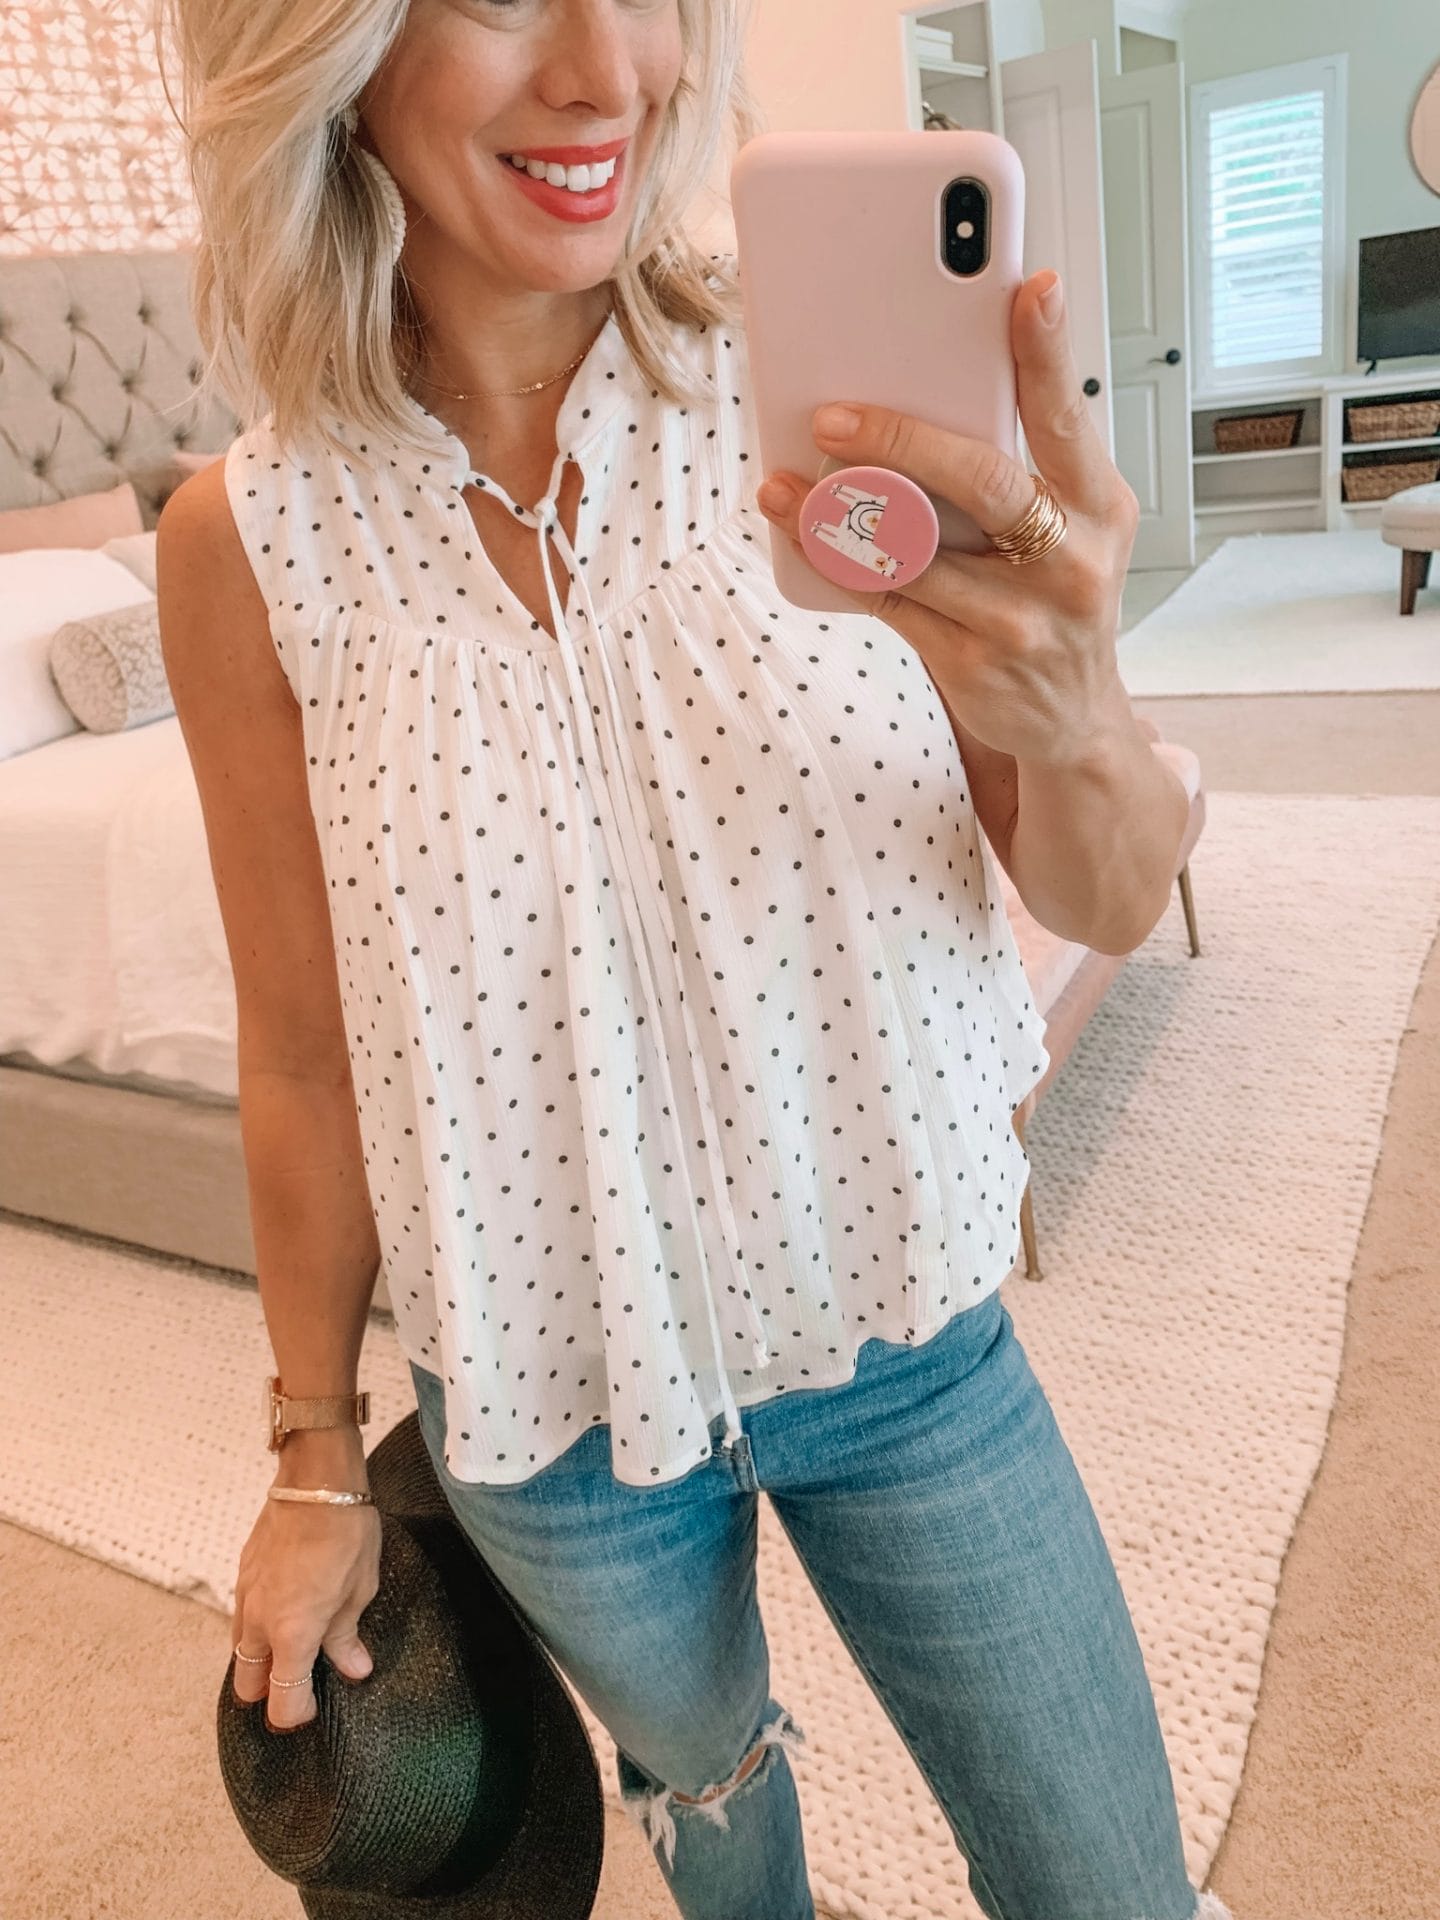 Polka dot top and ripped jeans with wedges